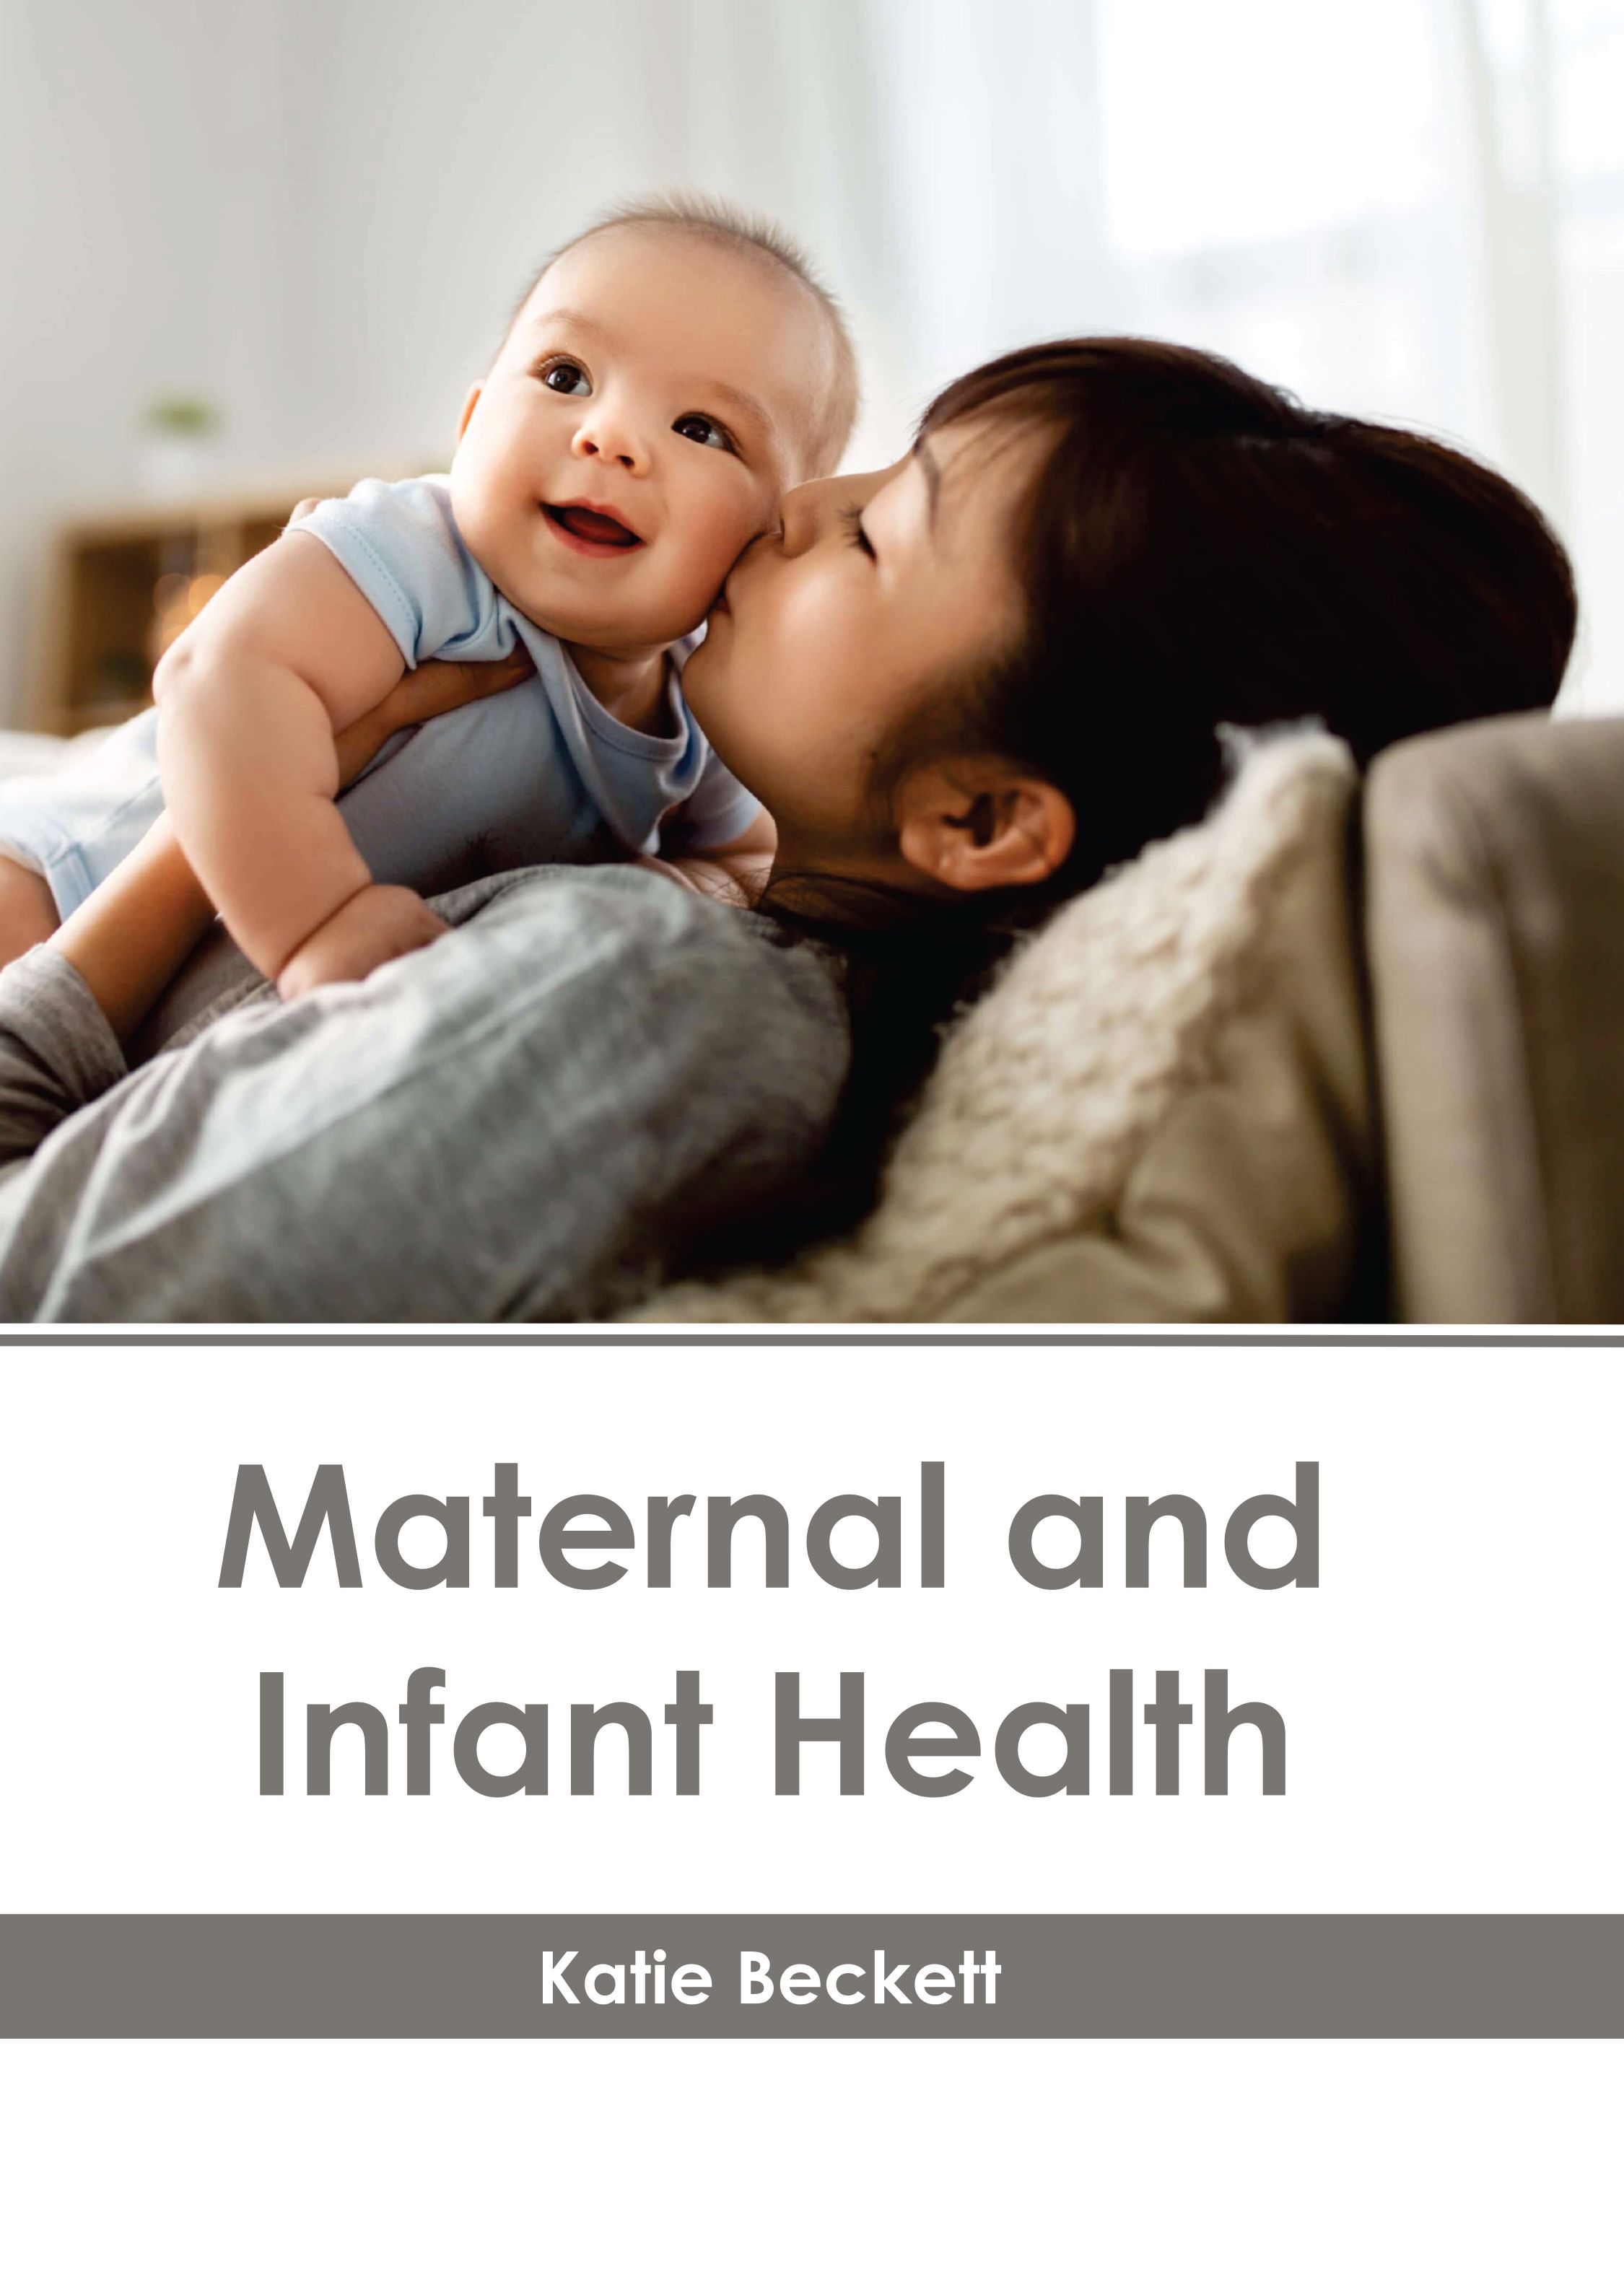 MATERNAL AND INFANT HEALTH